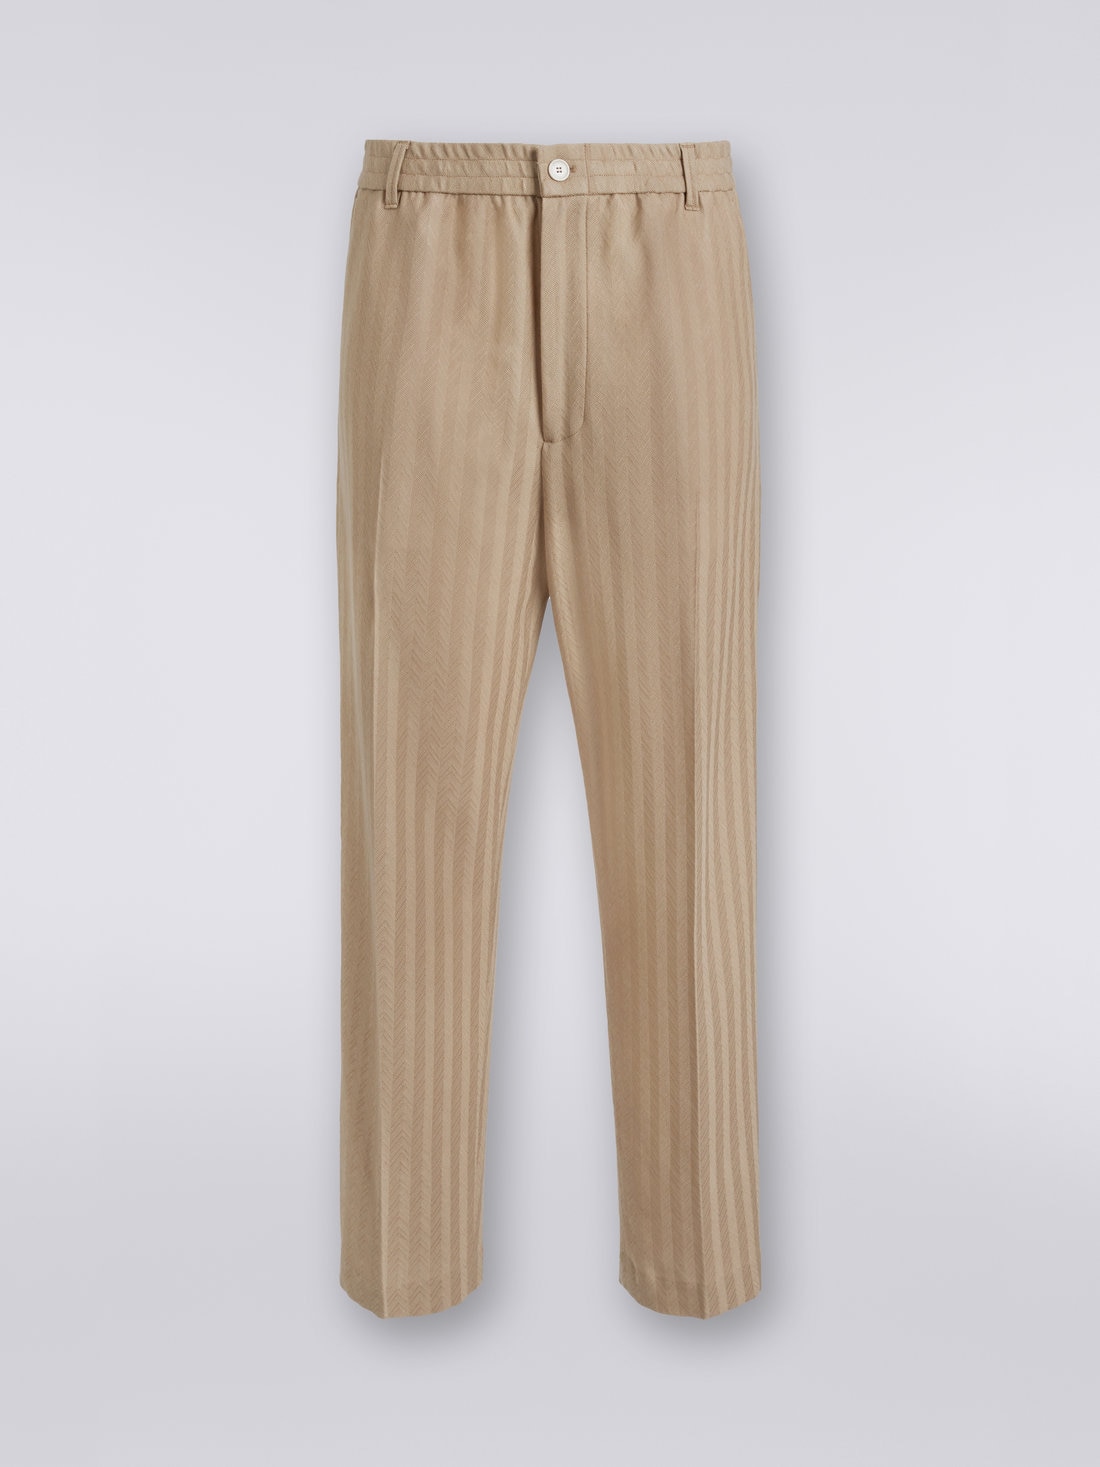 Viscose and cotton chevron trousers with ironed crease, White  - US23SI00BR00L051307 - 0